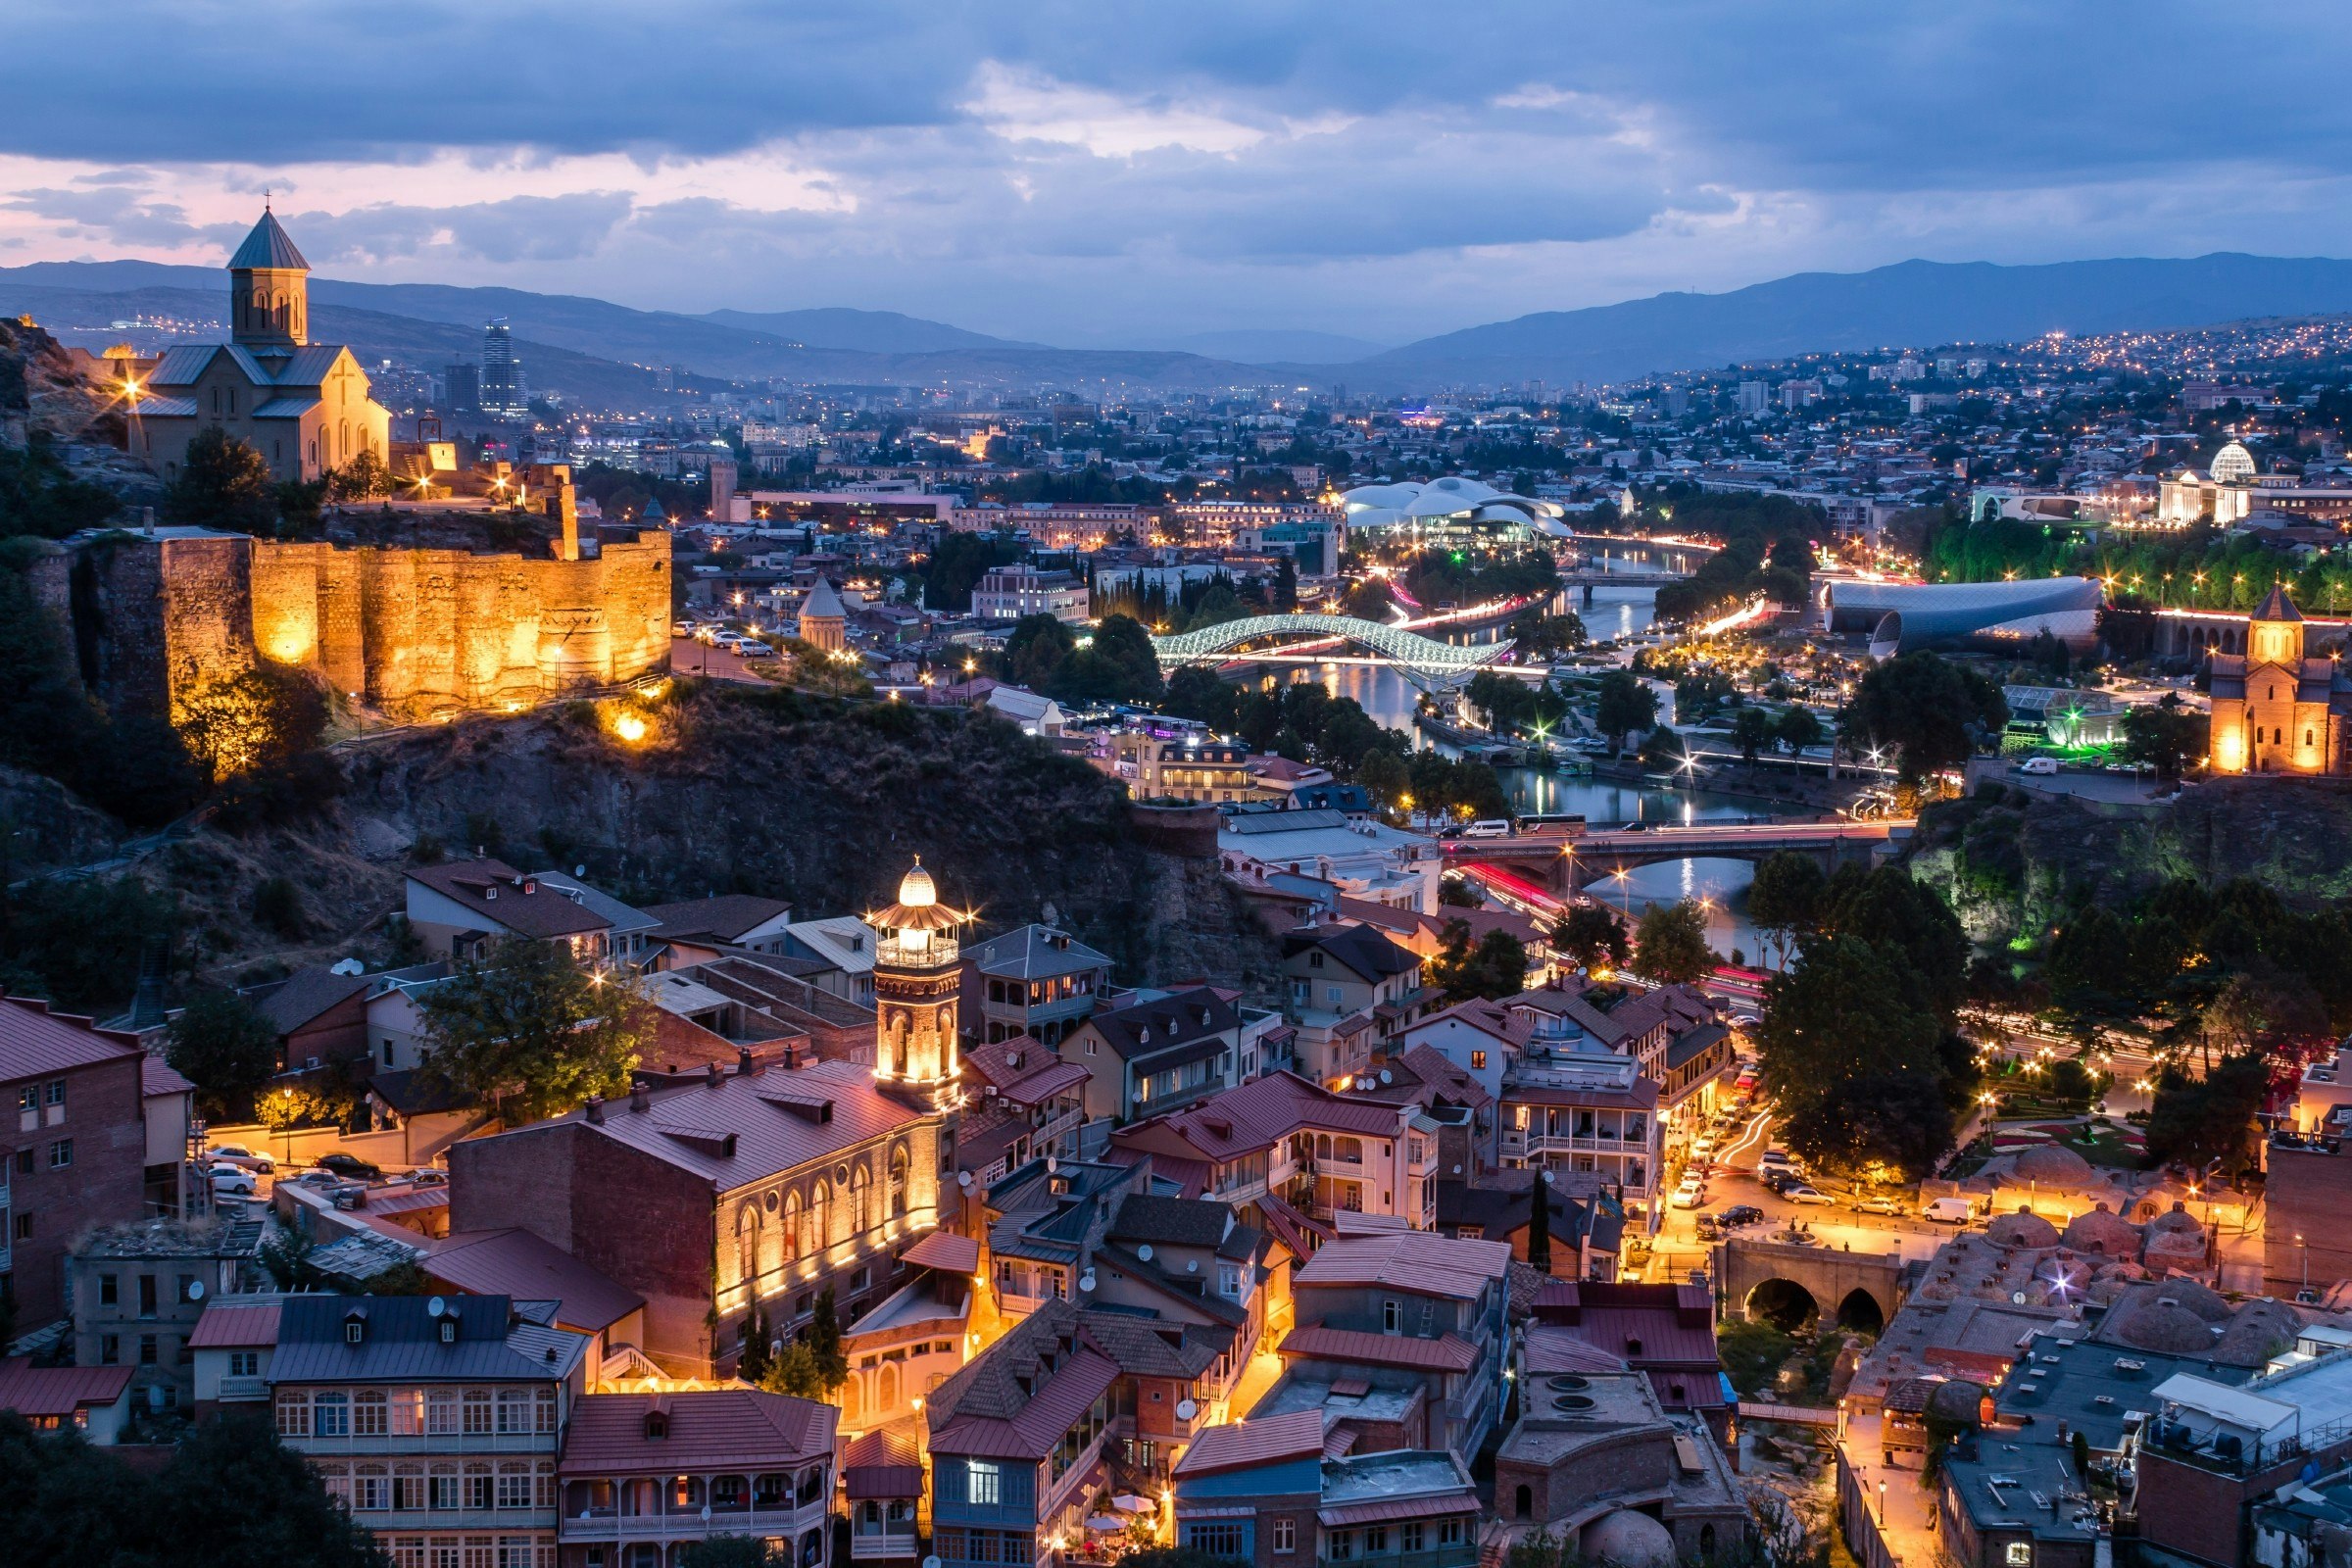 The Old Town and Narikala Fortress at dusk in Tbilisi